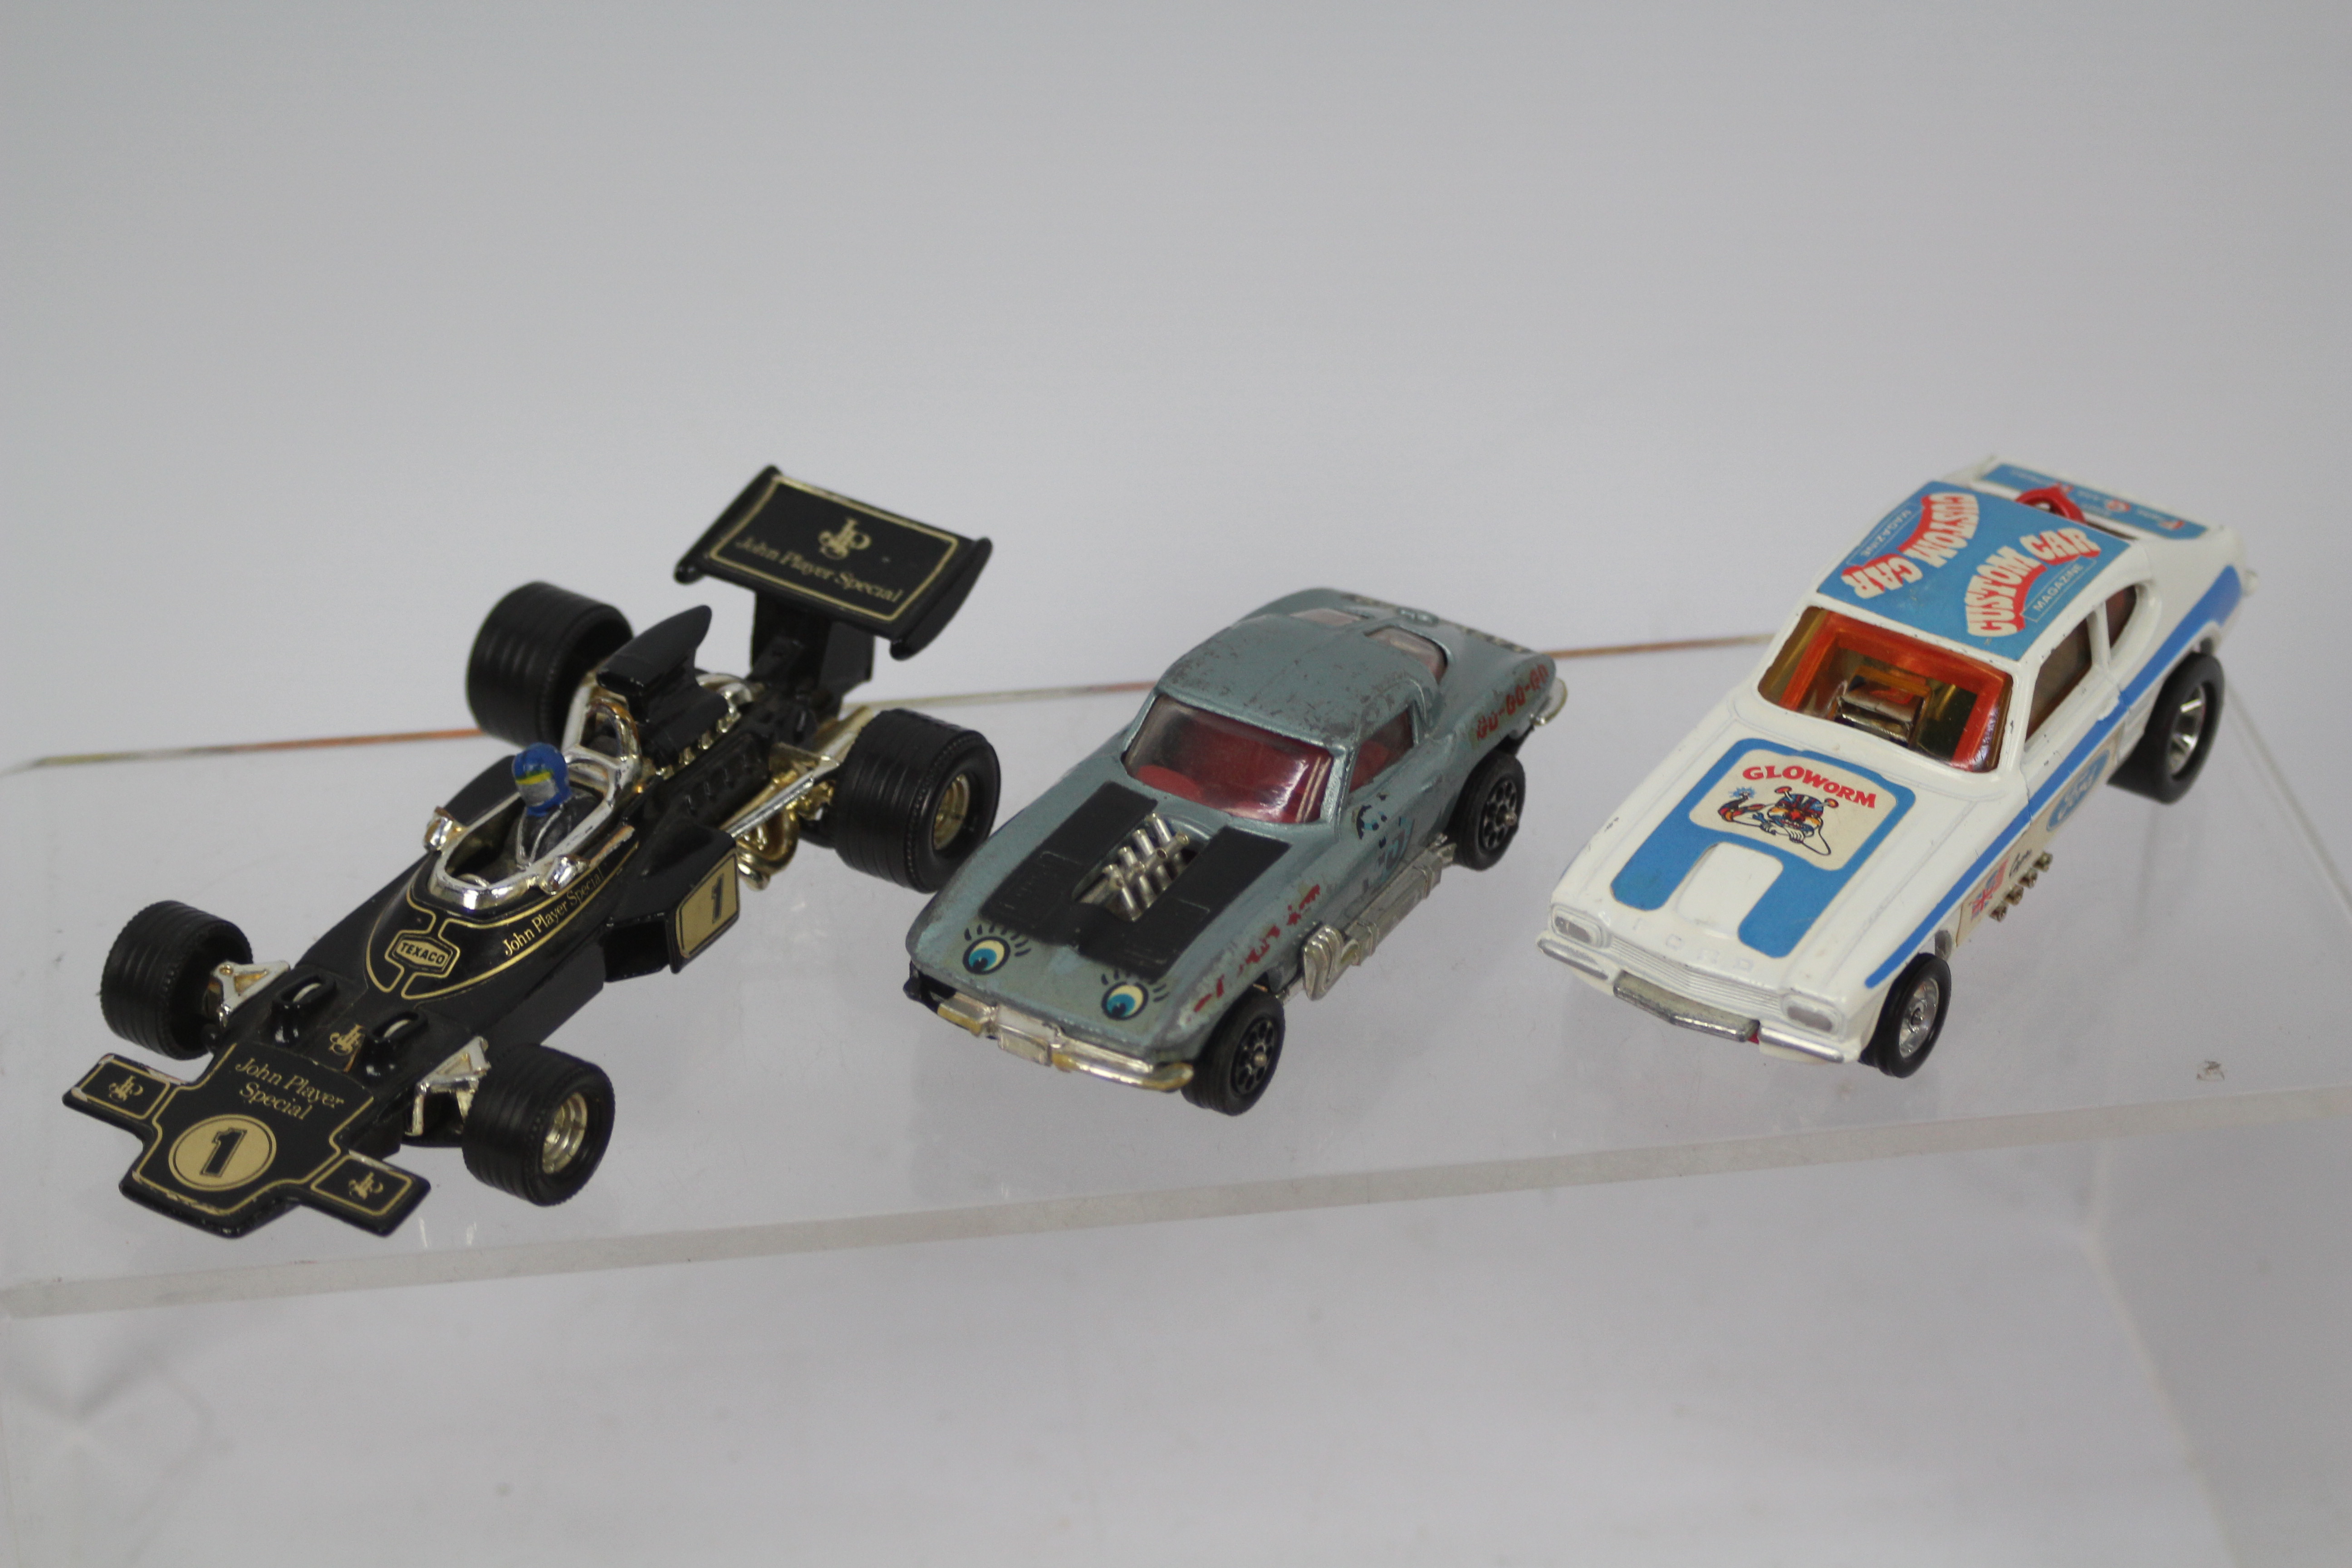 Corgi Toys - A selection of 20 loose Corgi Toys in excellent condition to include: Whizzwheels - Image 5 of 5